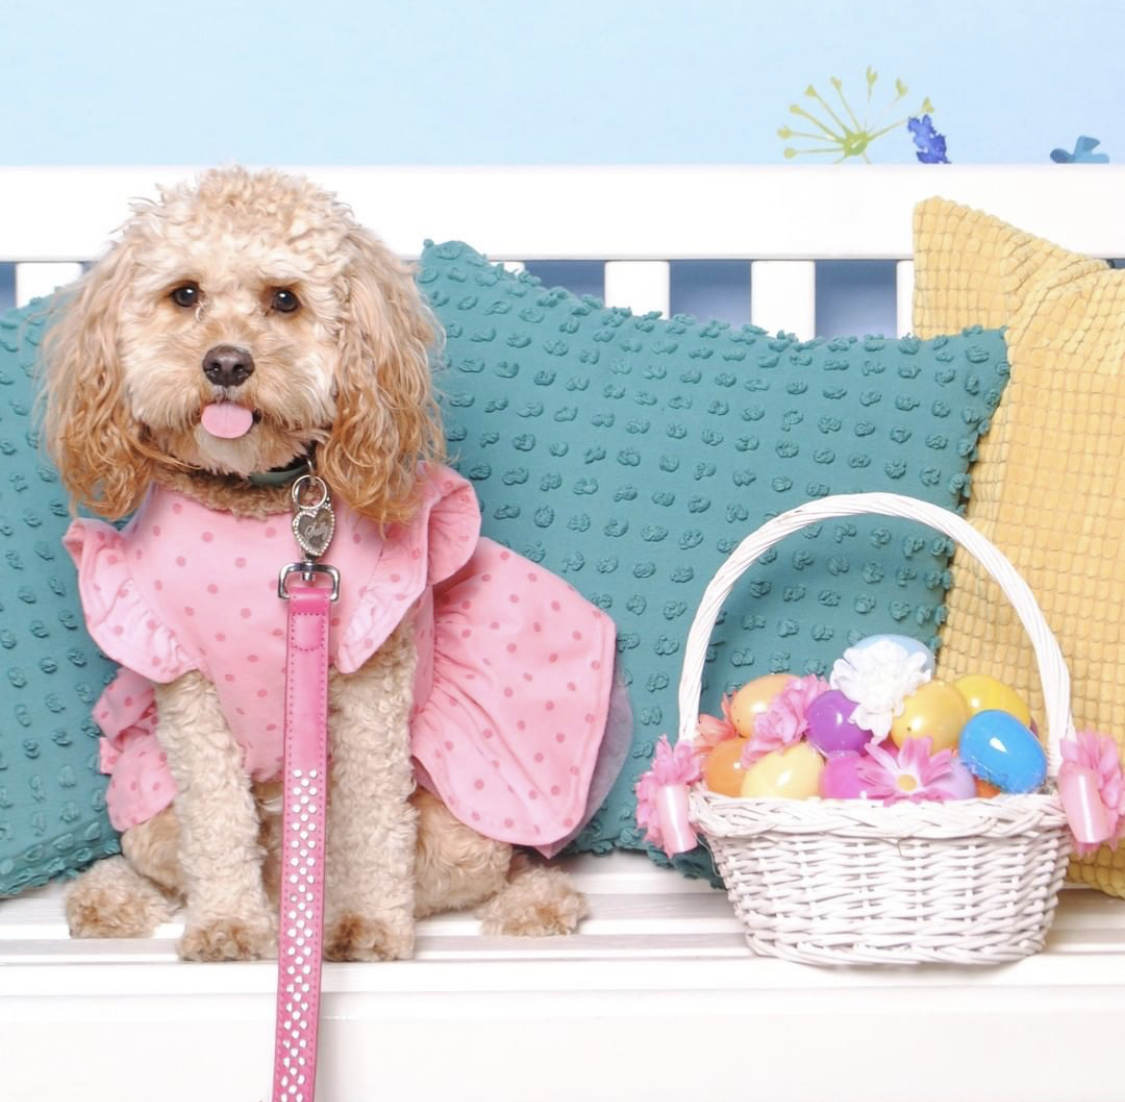 Dog in a dress next to basket of Easter eggs